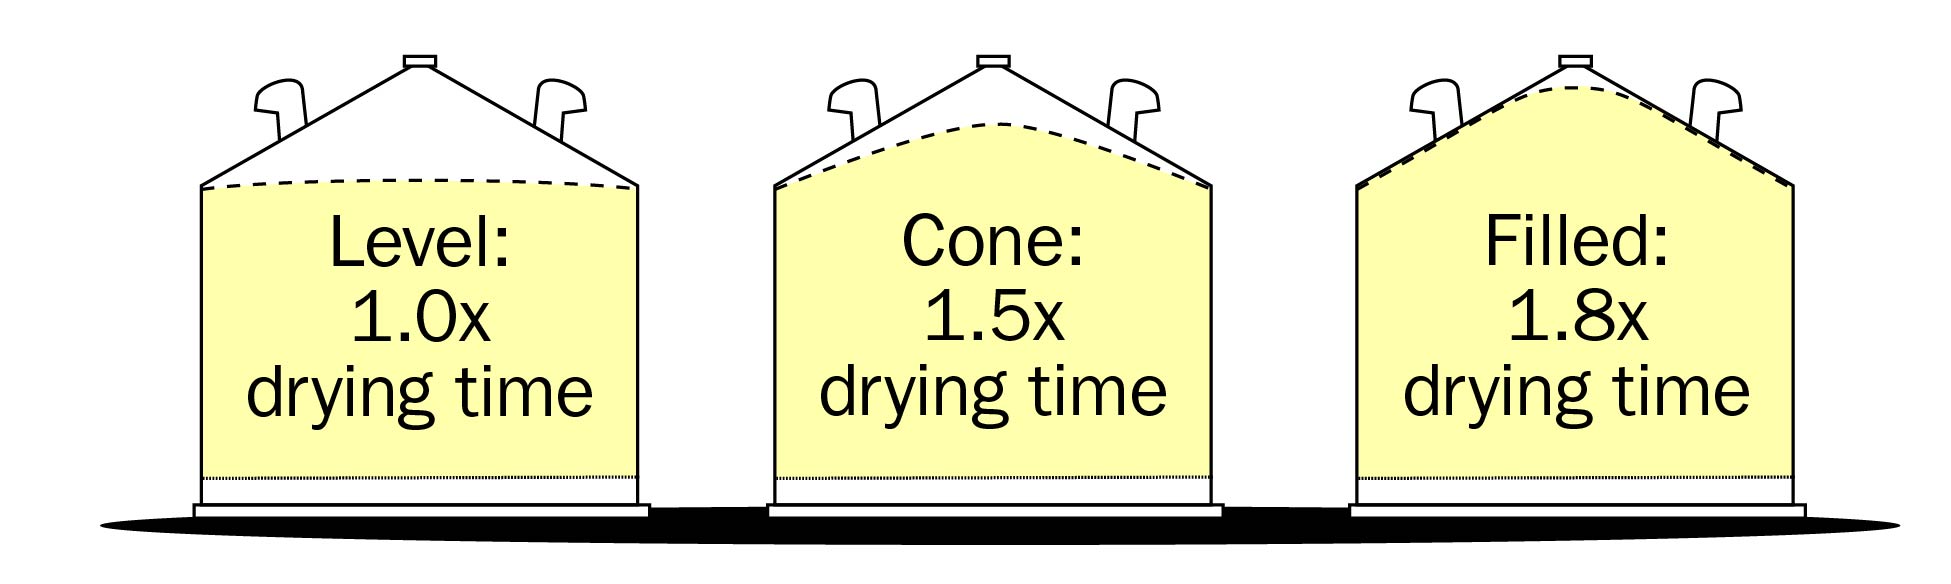 This drawing shows 3 grain bins filled with different levels of grain and the impact of grain leveling on the time it takes to dry the entire bin. Grain piled in a cone takes 50% longer to dry, compared to grain that has been leveled. A bin filled right to the roof line takes 80% longer or more to dry.